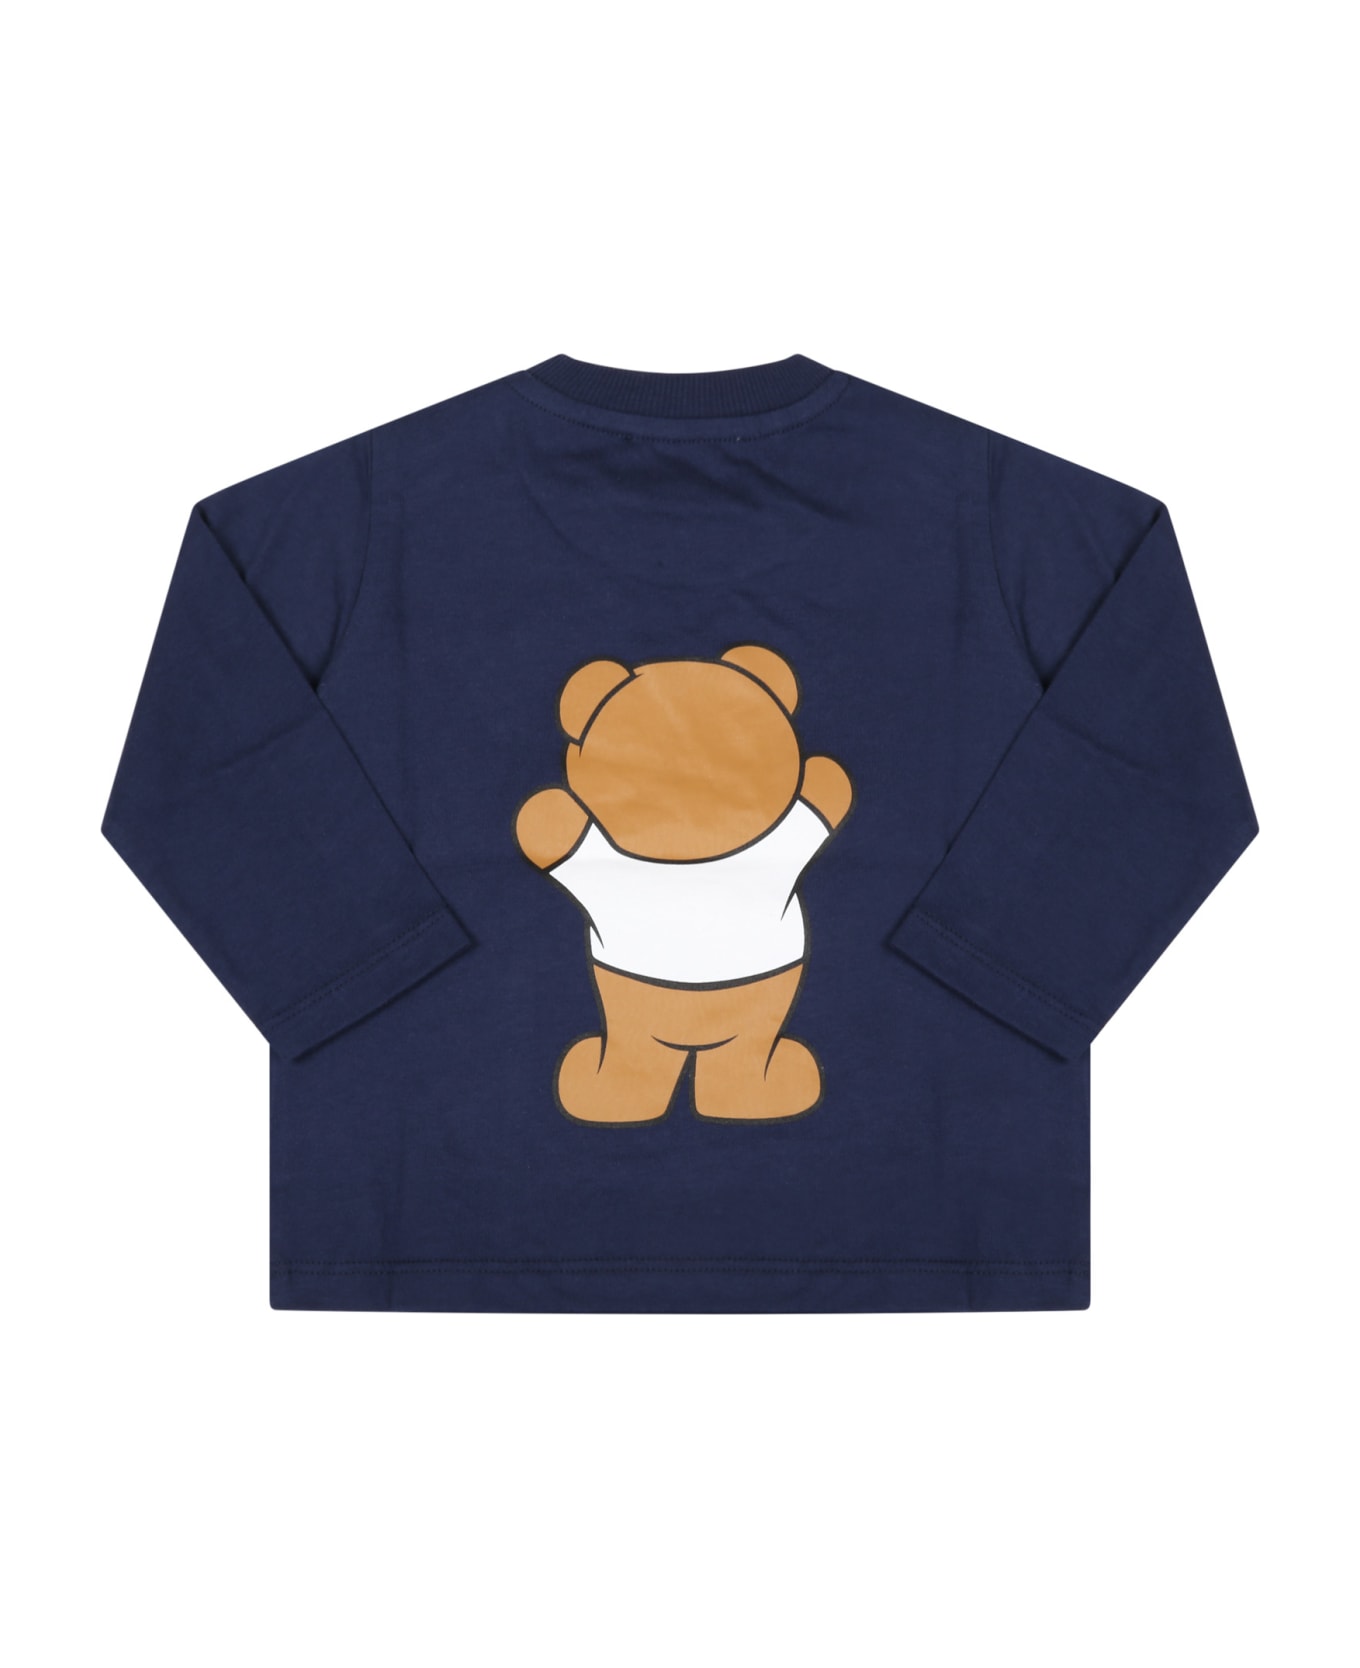 Moschino Blue T-shirt For Baby Kids With Teddy Bear - Blue